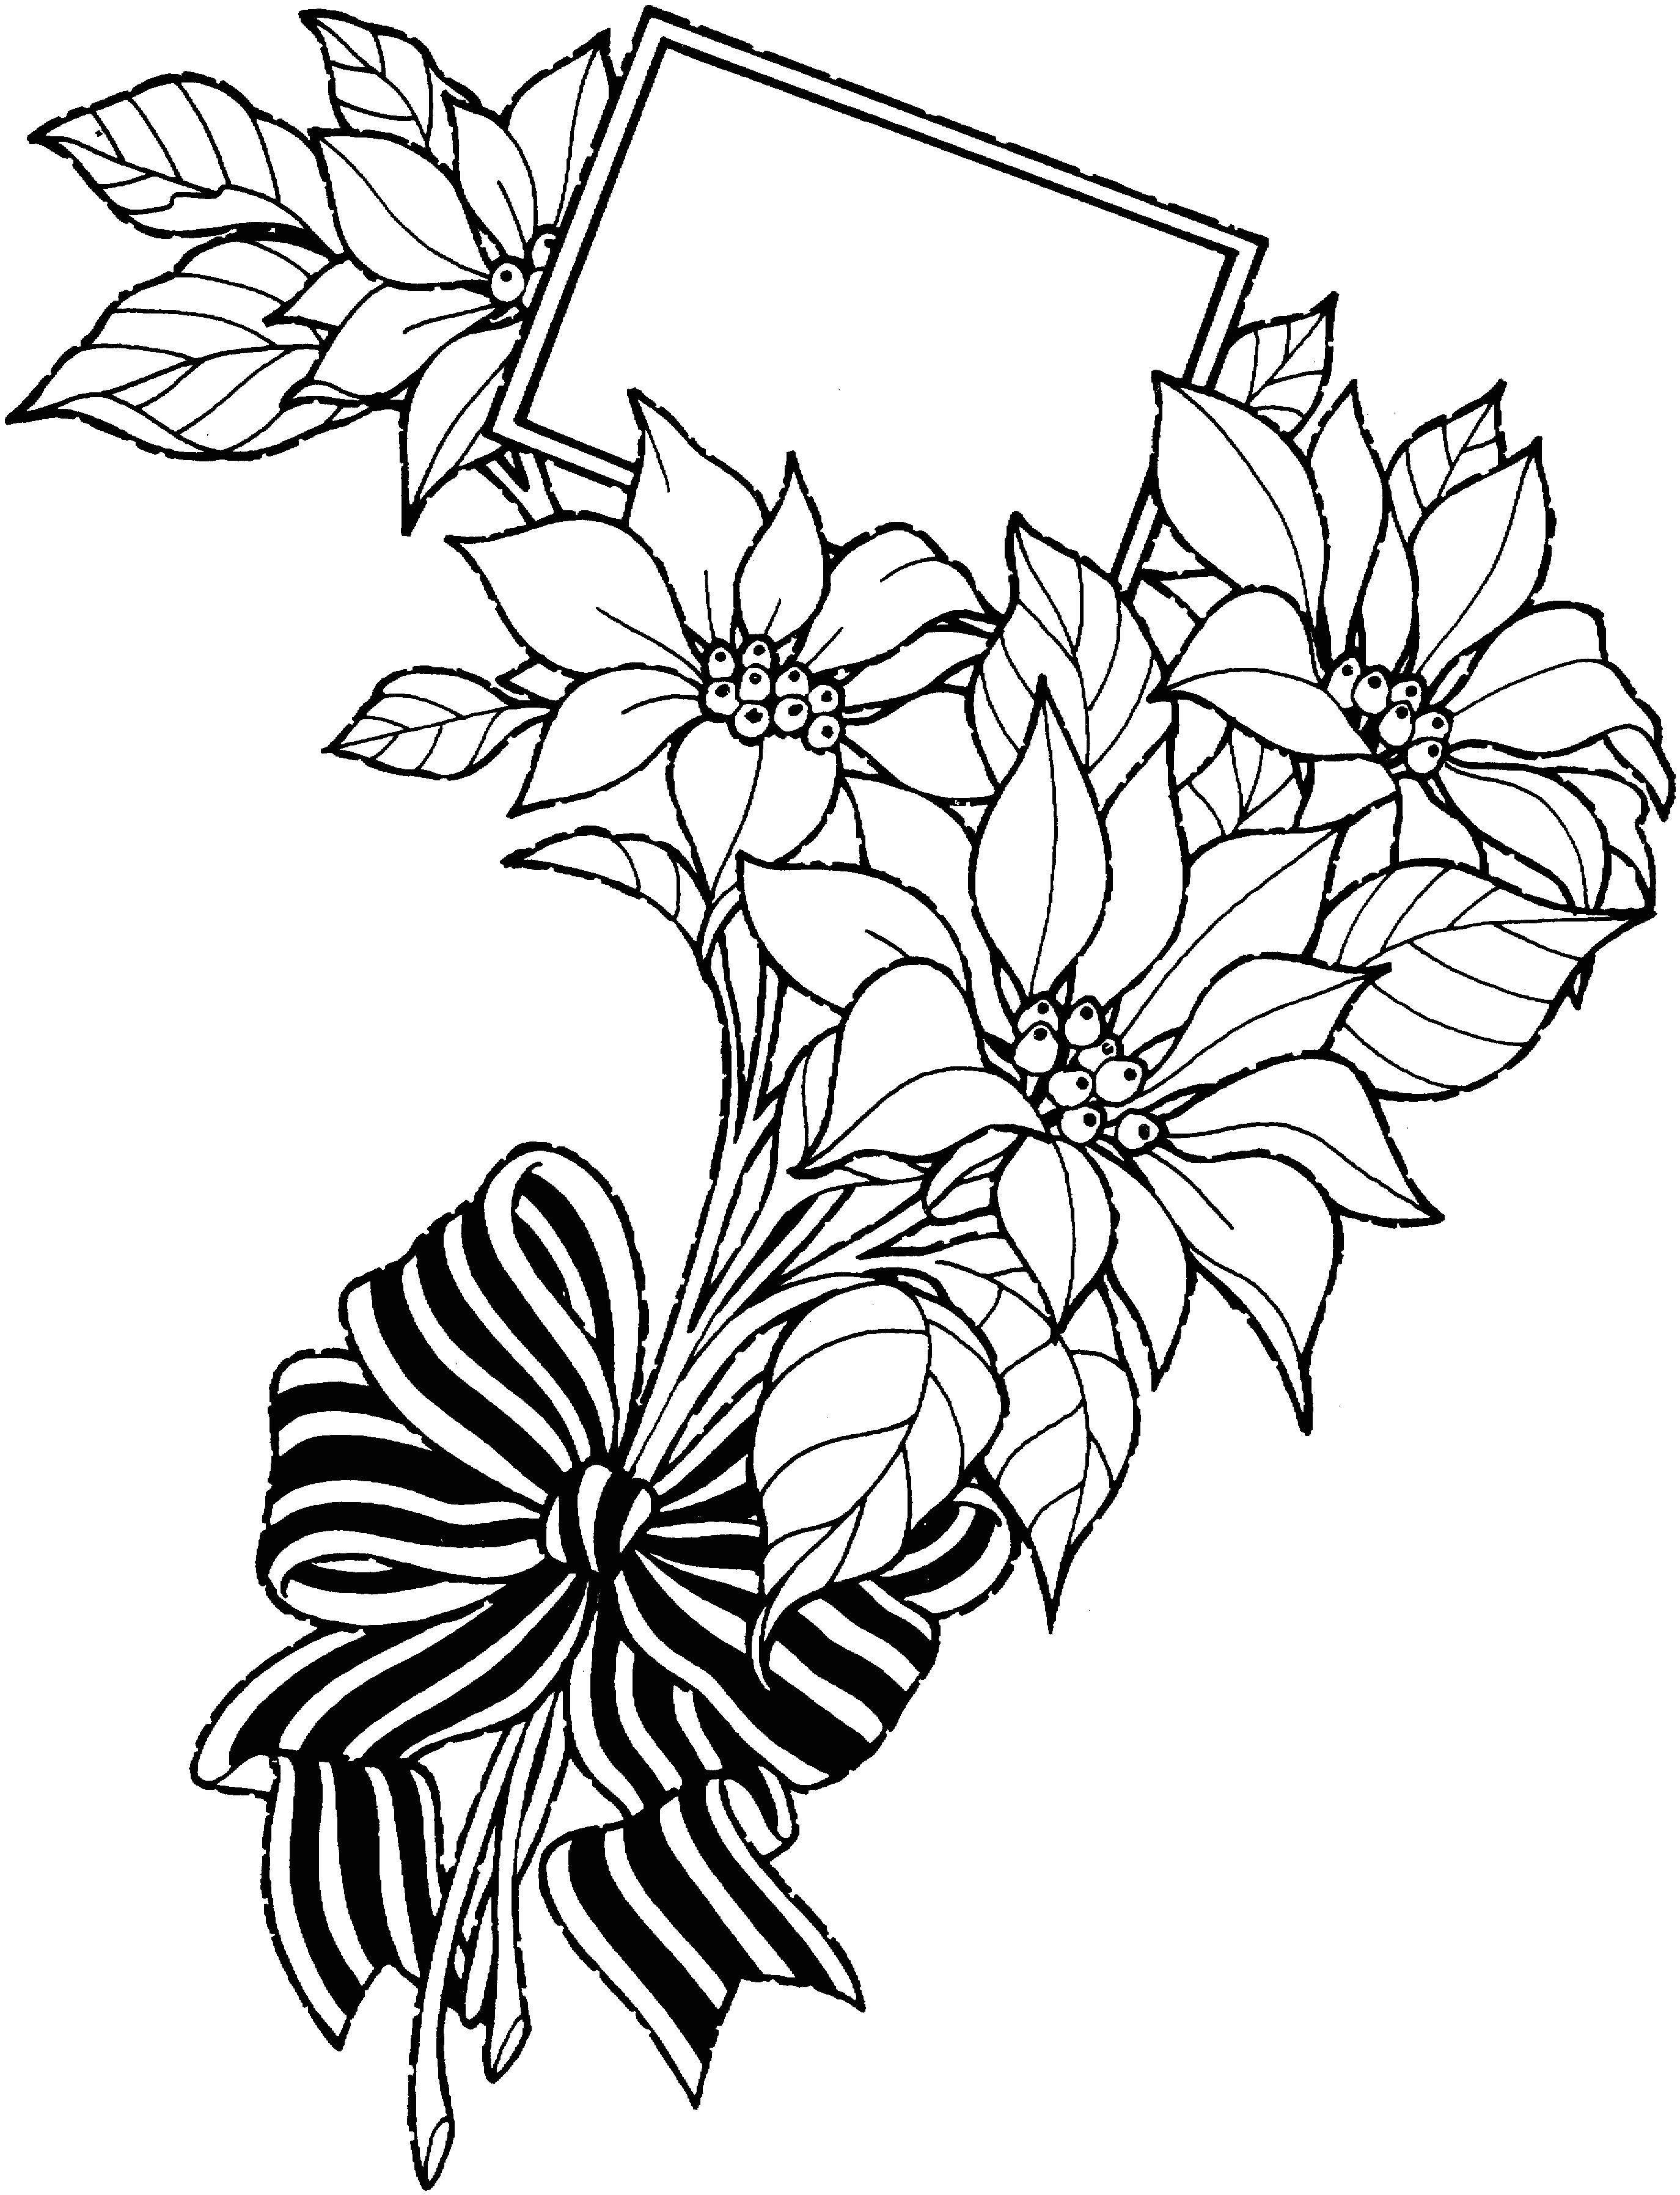 Drawing Of A Rose Vase Rose Drawing Fresh 20 Awesome White Rose Flowers Black Ezba